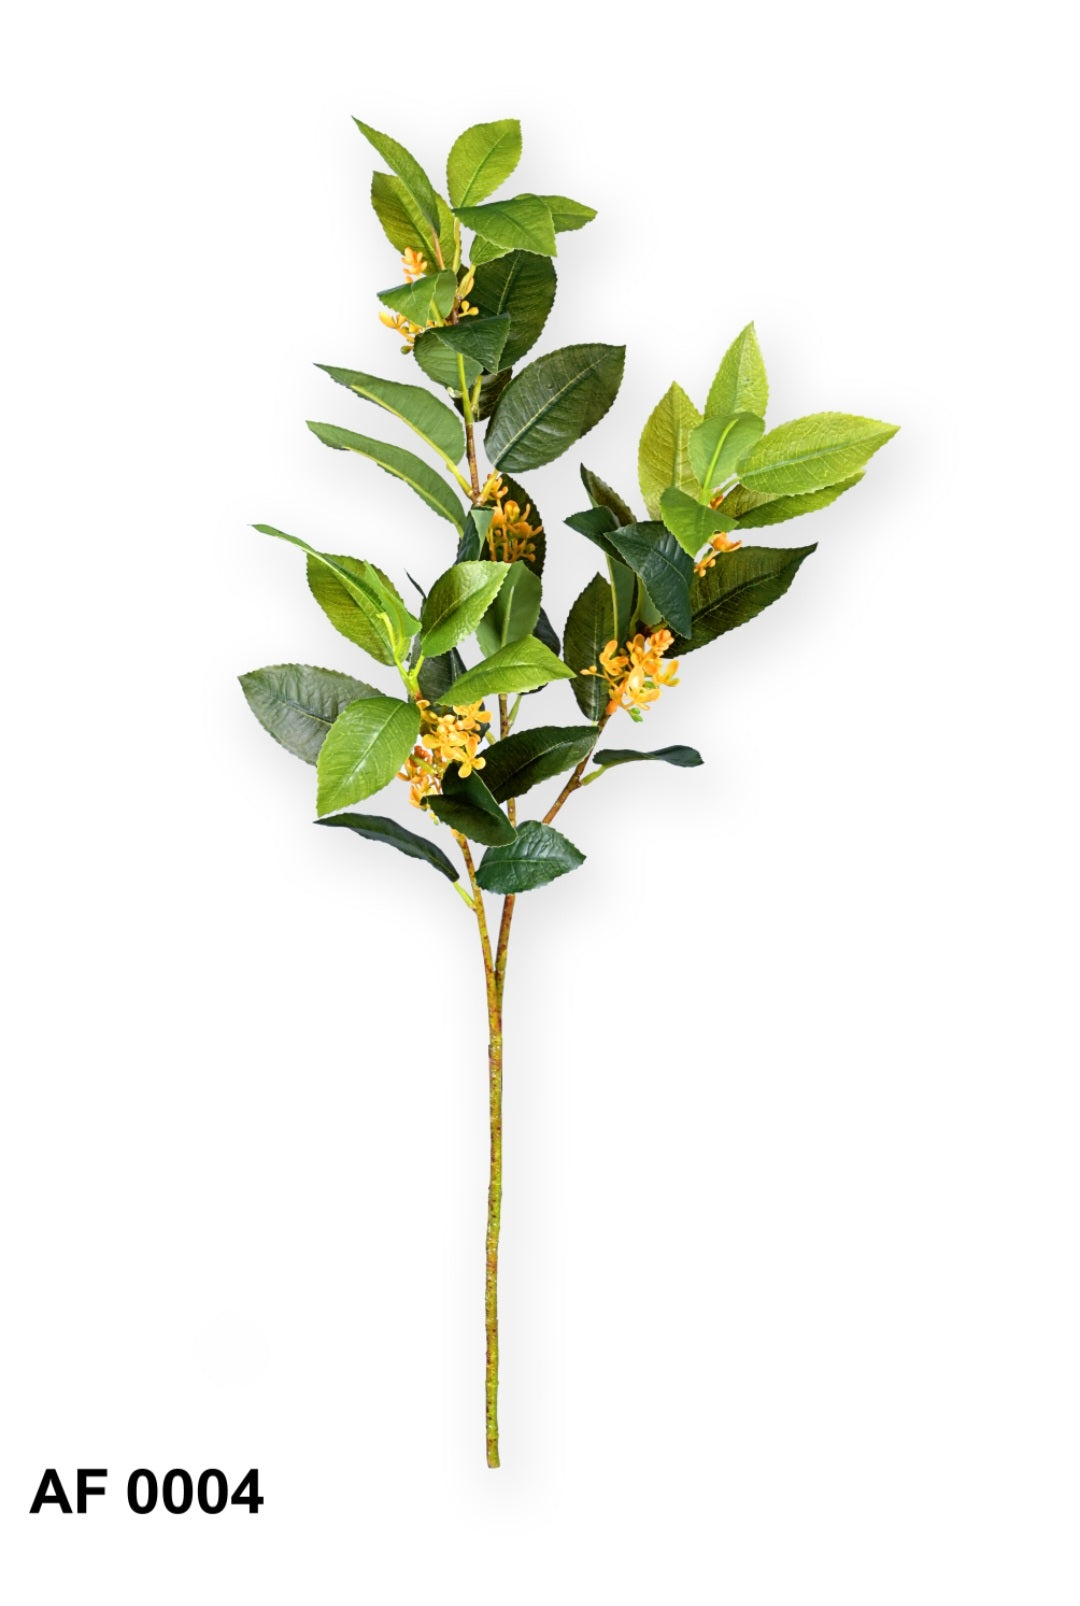 Shaded green stick with yellow stem